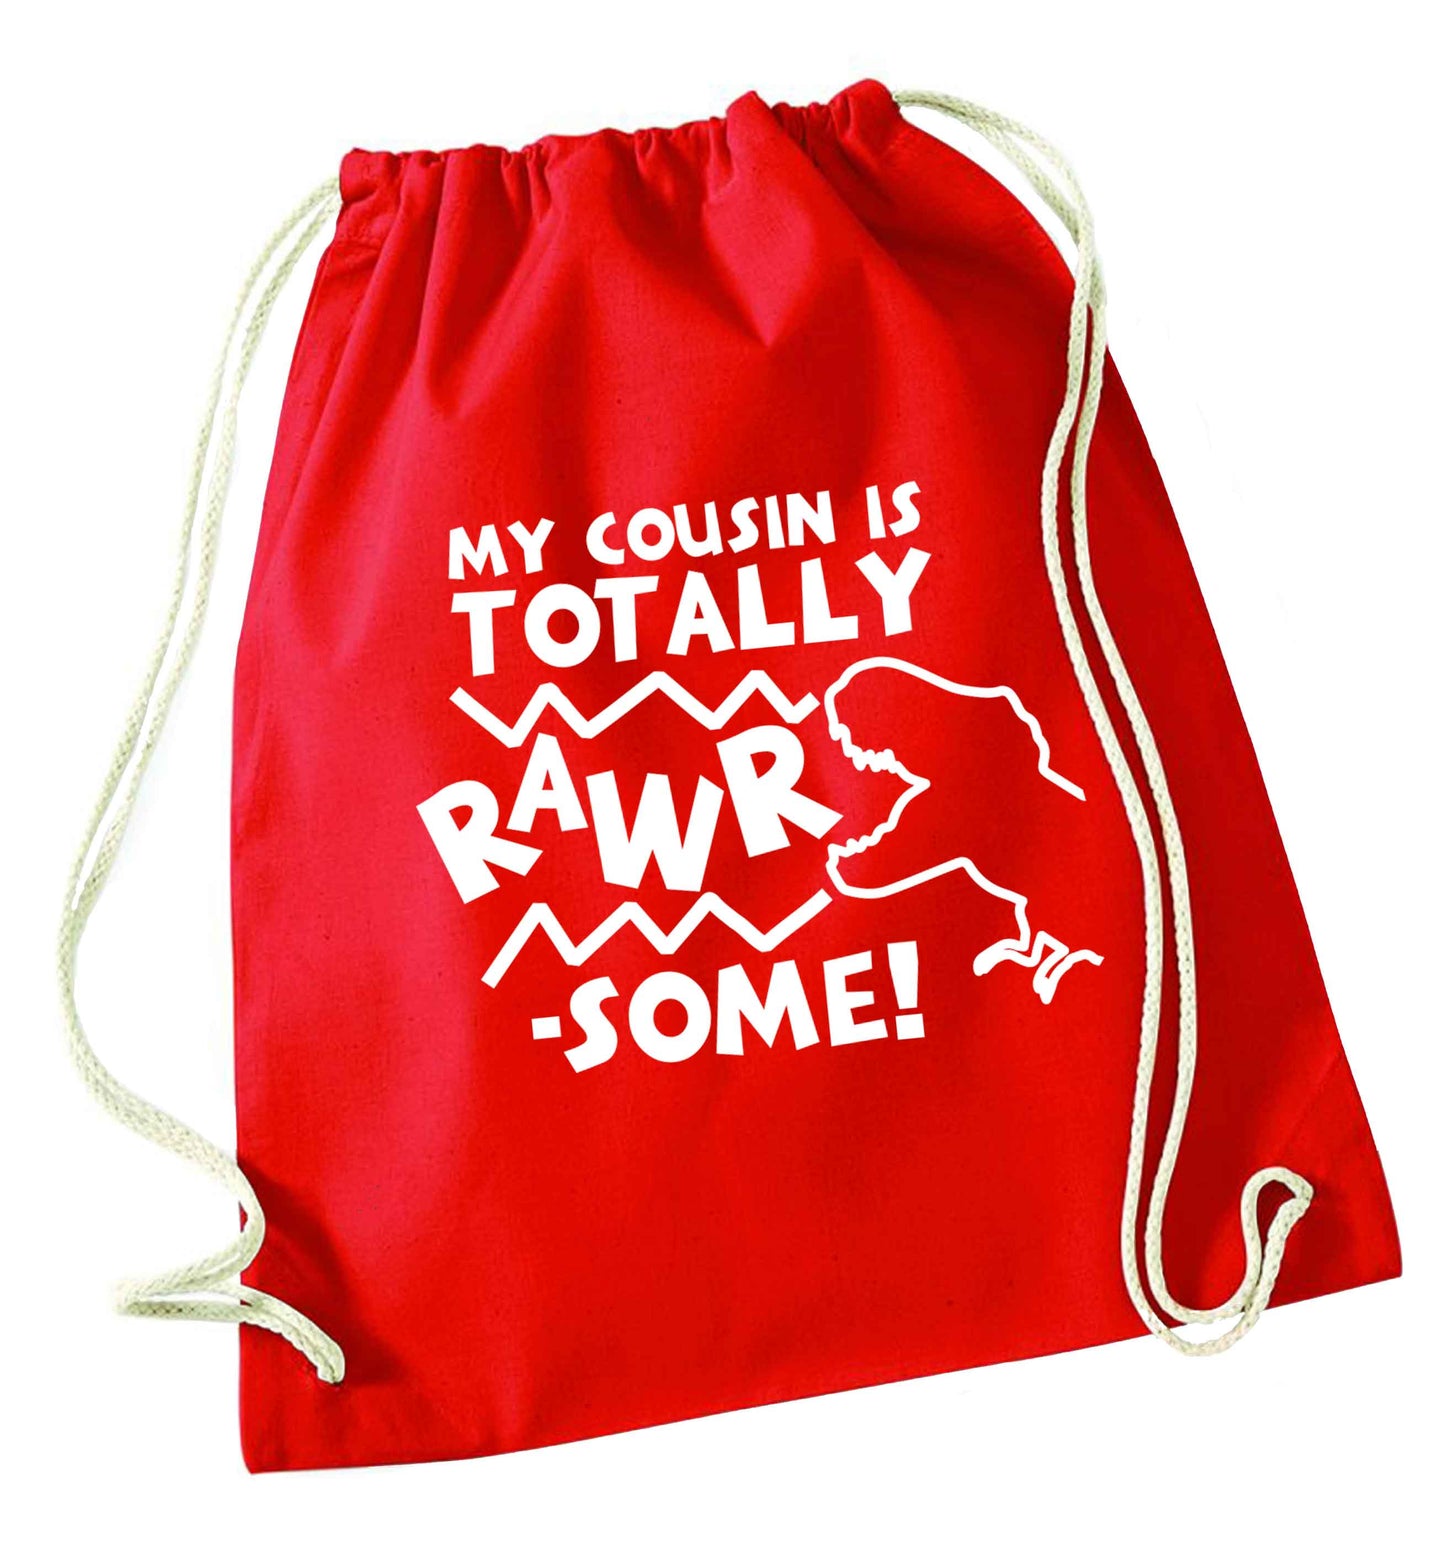 My cousin is totally rawrsome red drawstring bag 